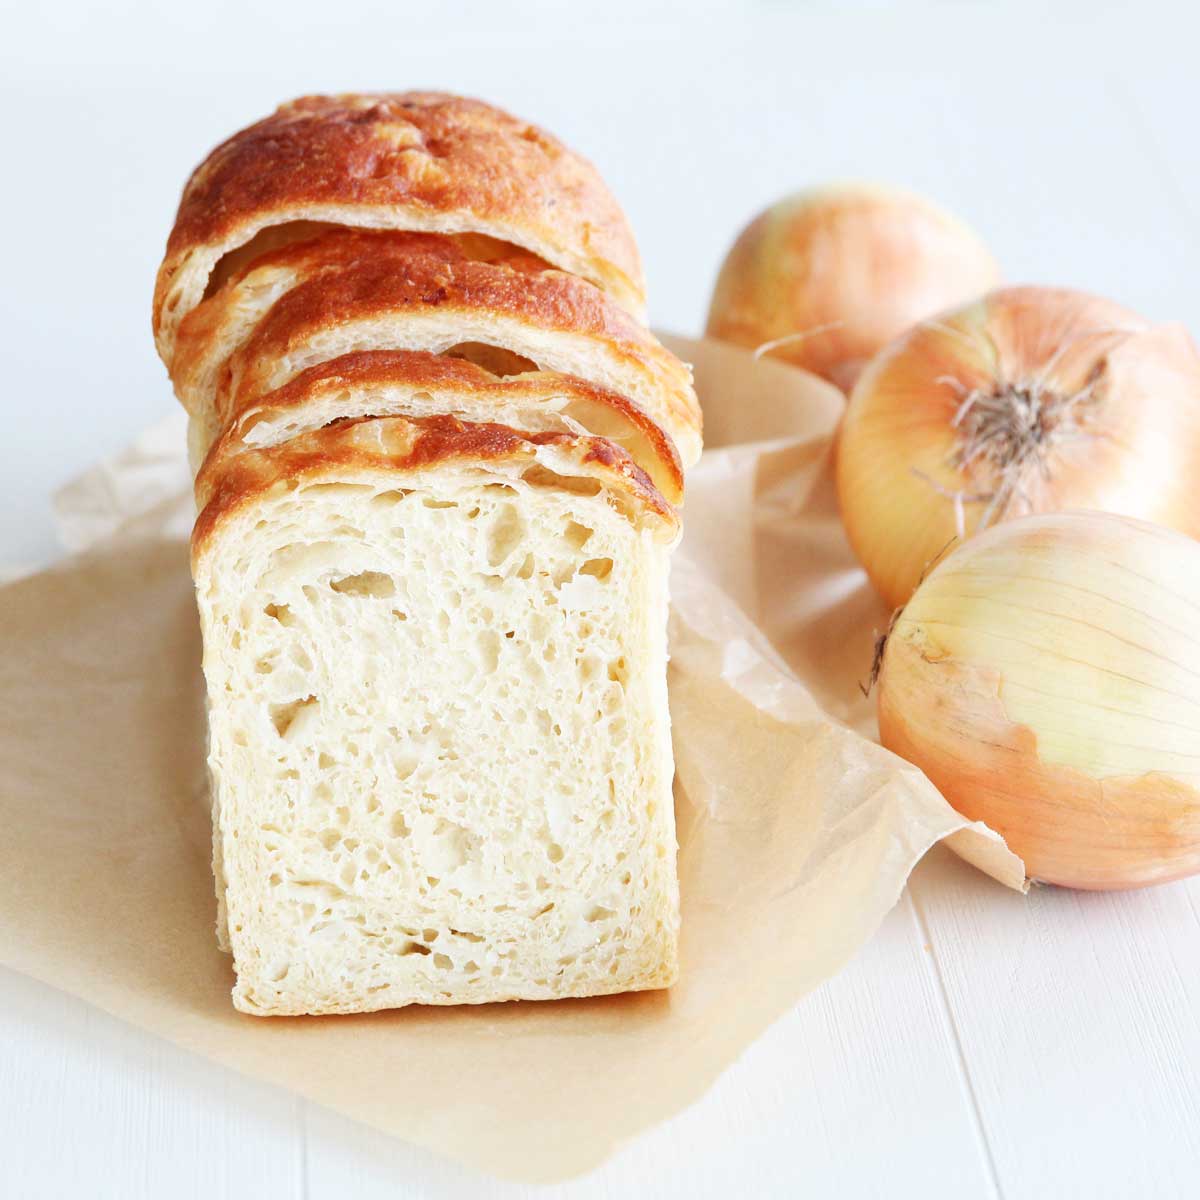 10 Healthy & Vegan Yeast Bread Recipes Made With Fruits And Veggies - yeast bread